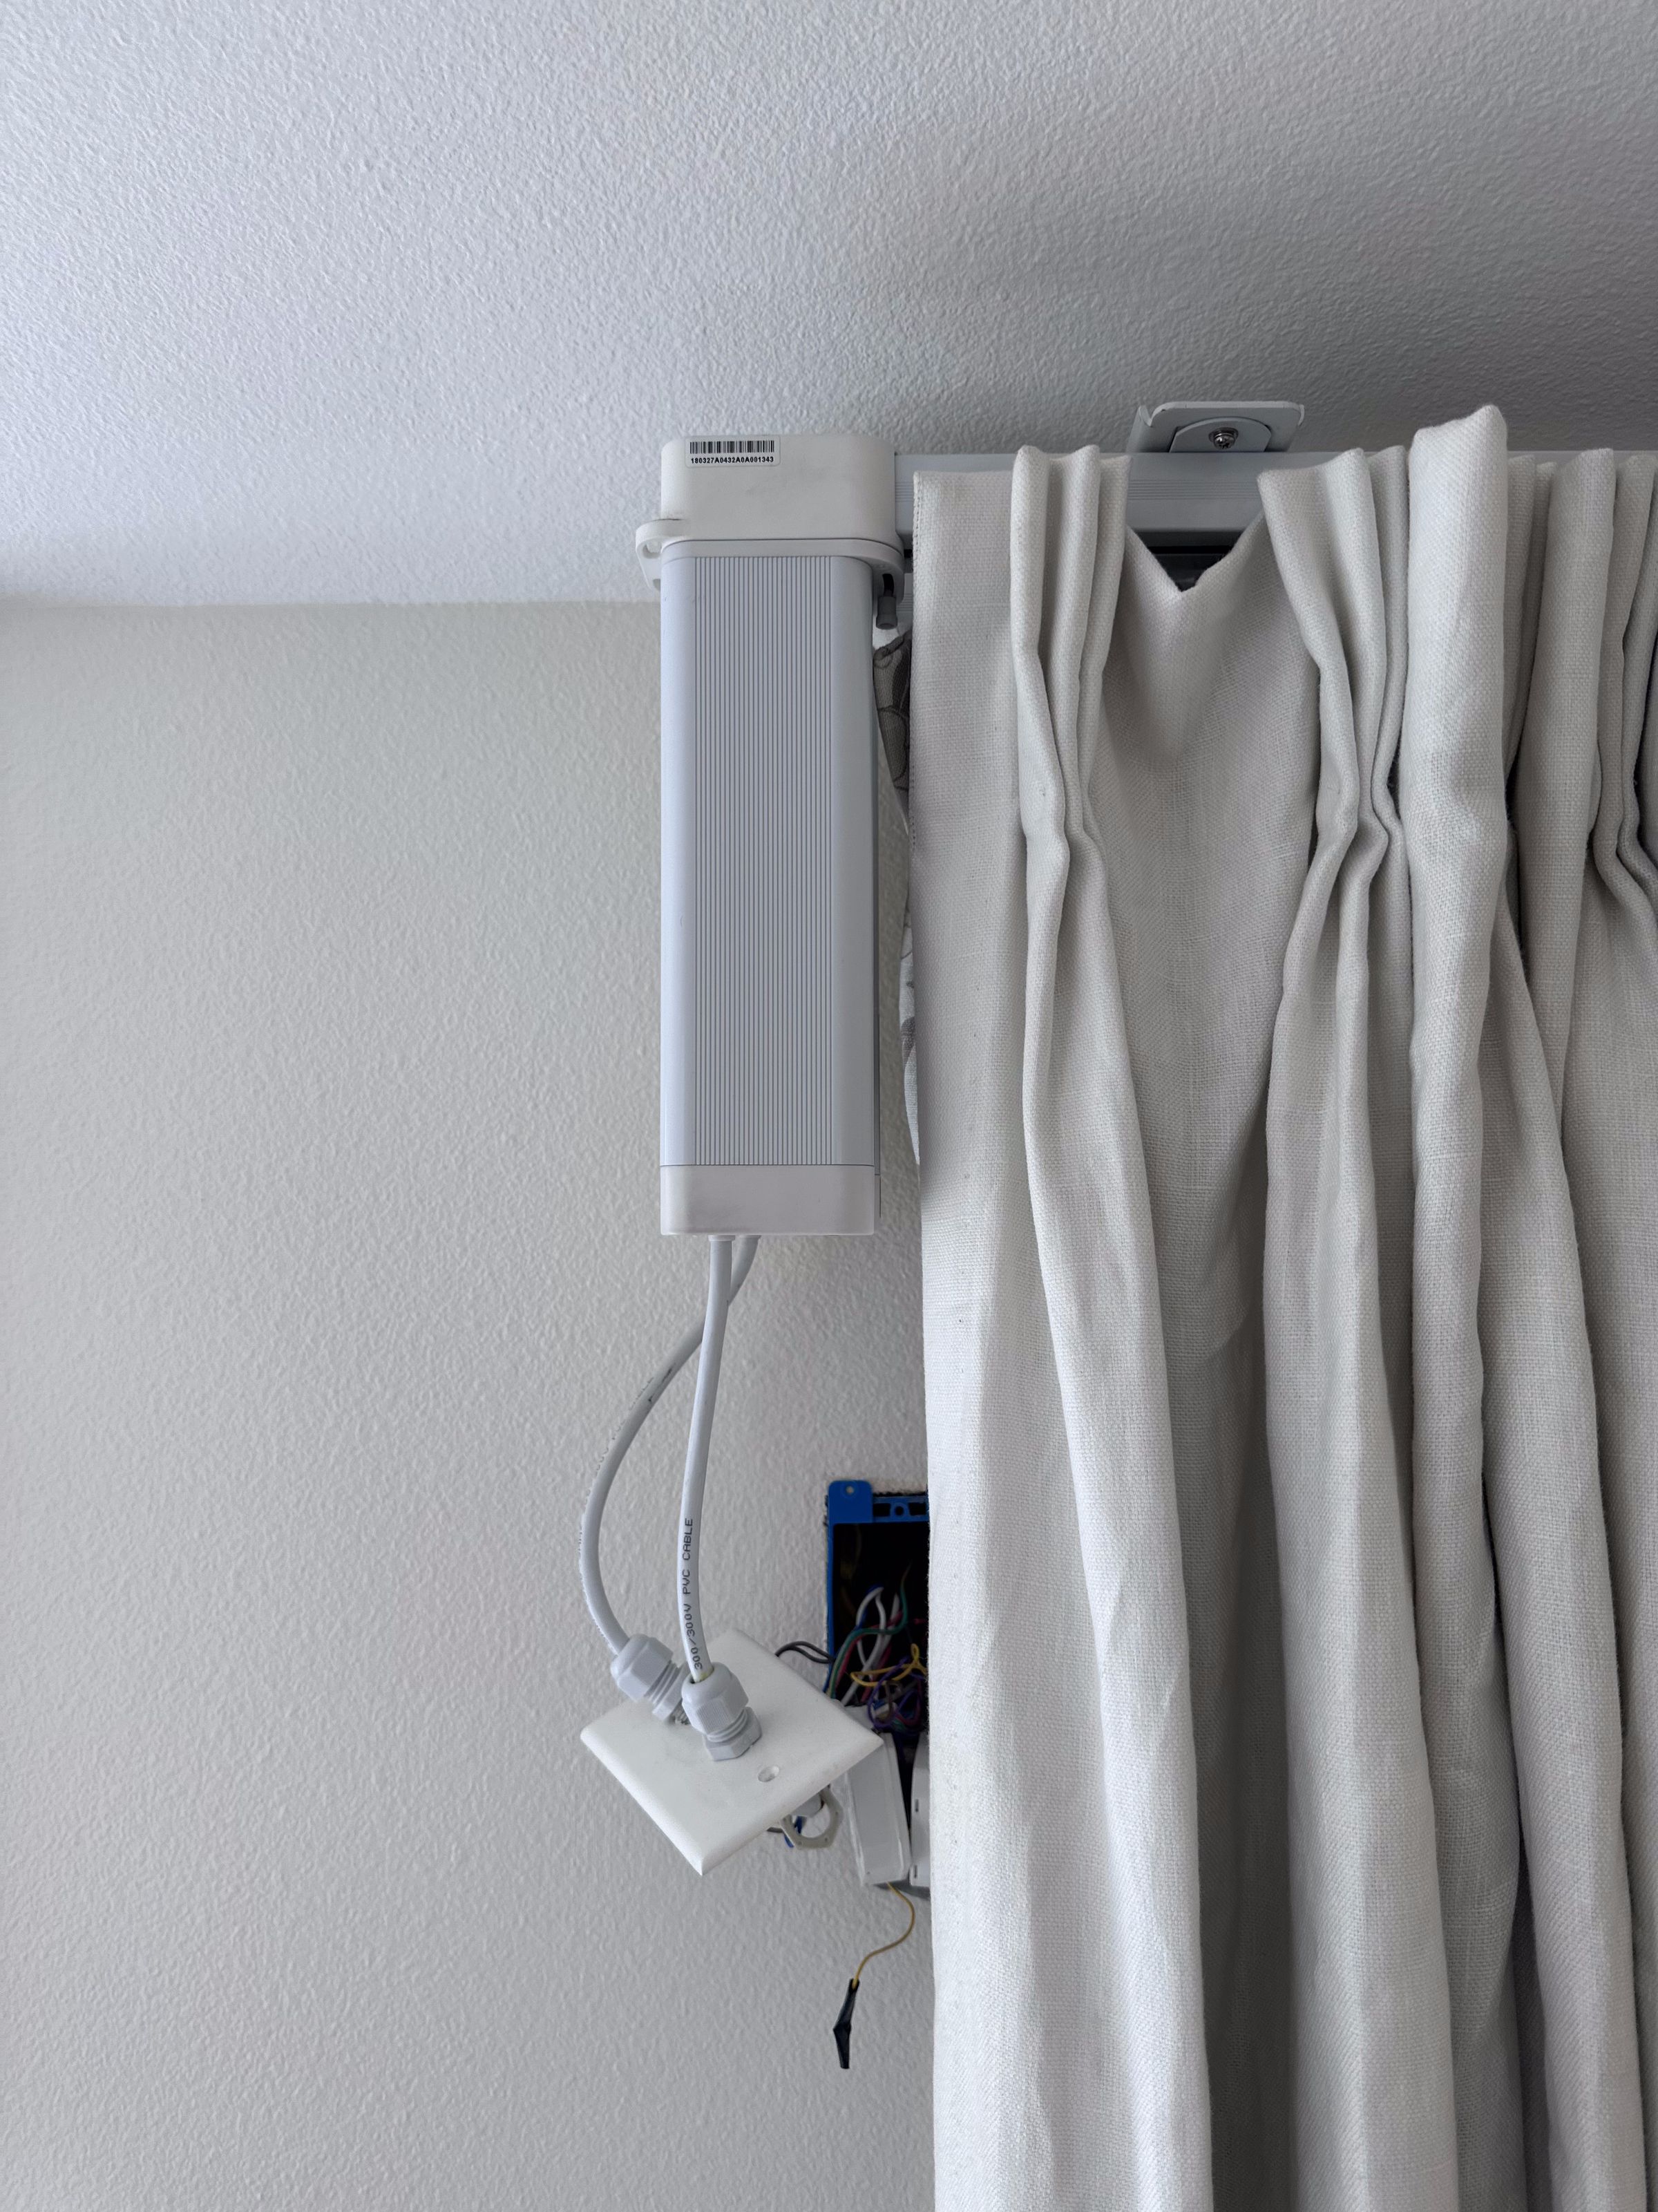 An image of a large white box with two cables coming out of it. It is attached to a curtain and appears to be a motor to open and close the curtains.